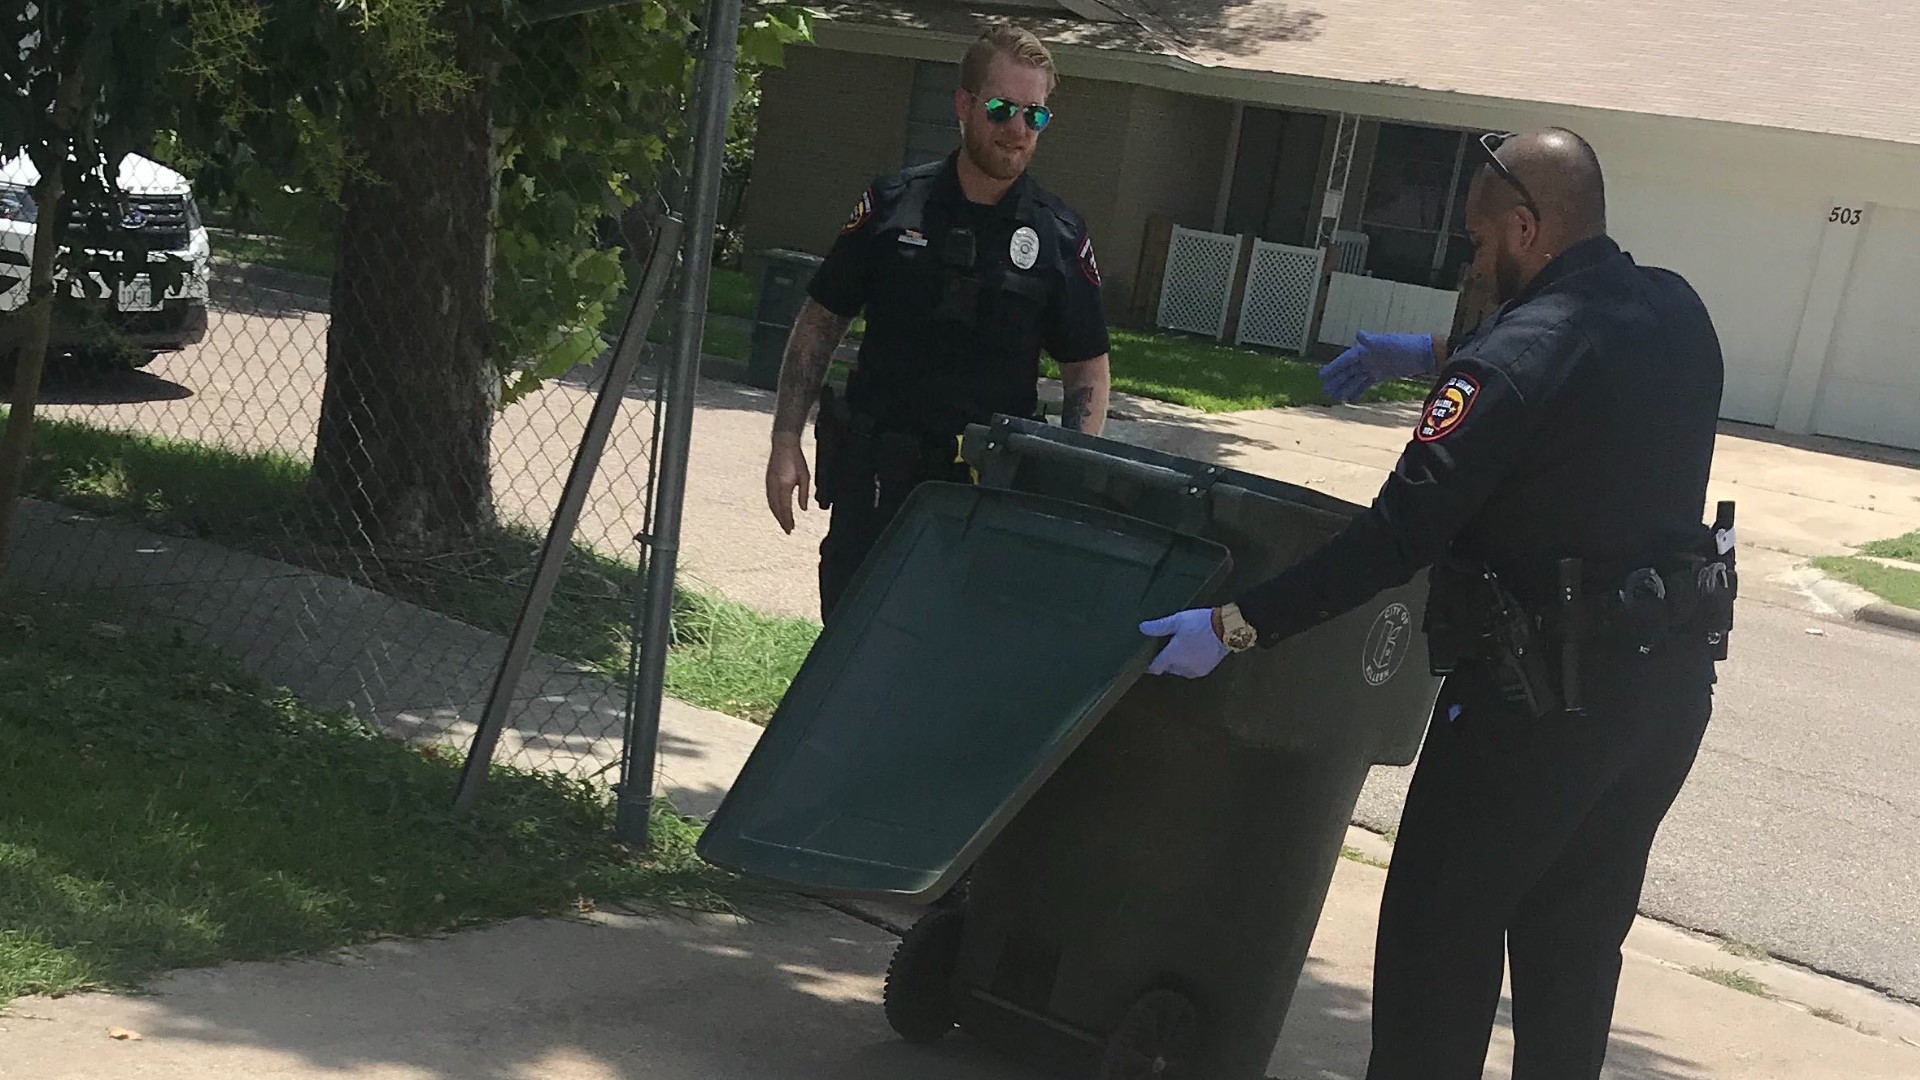 Over the 4th of July weekend Cristal Bowdler and her sister found two dead dogs inside their trash can outside of their Killeen home.